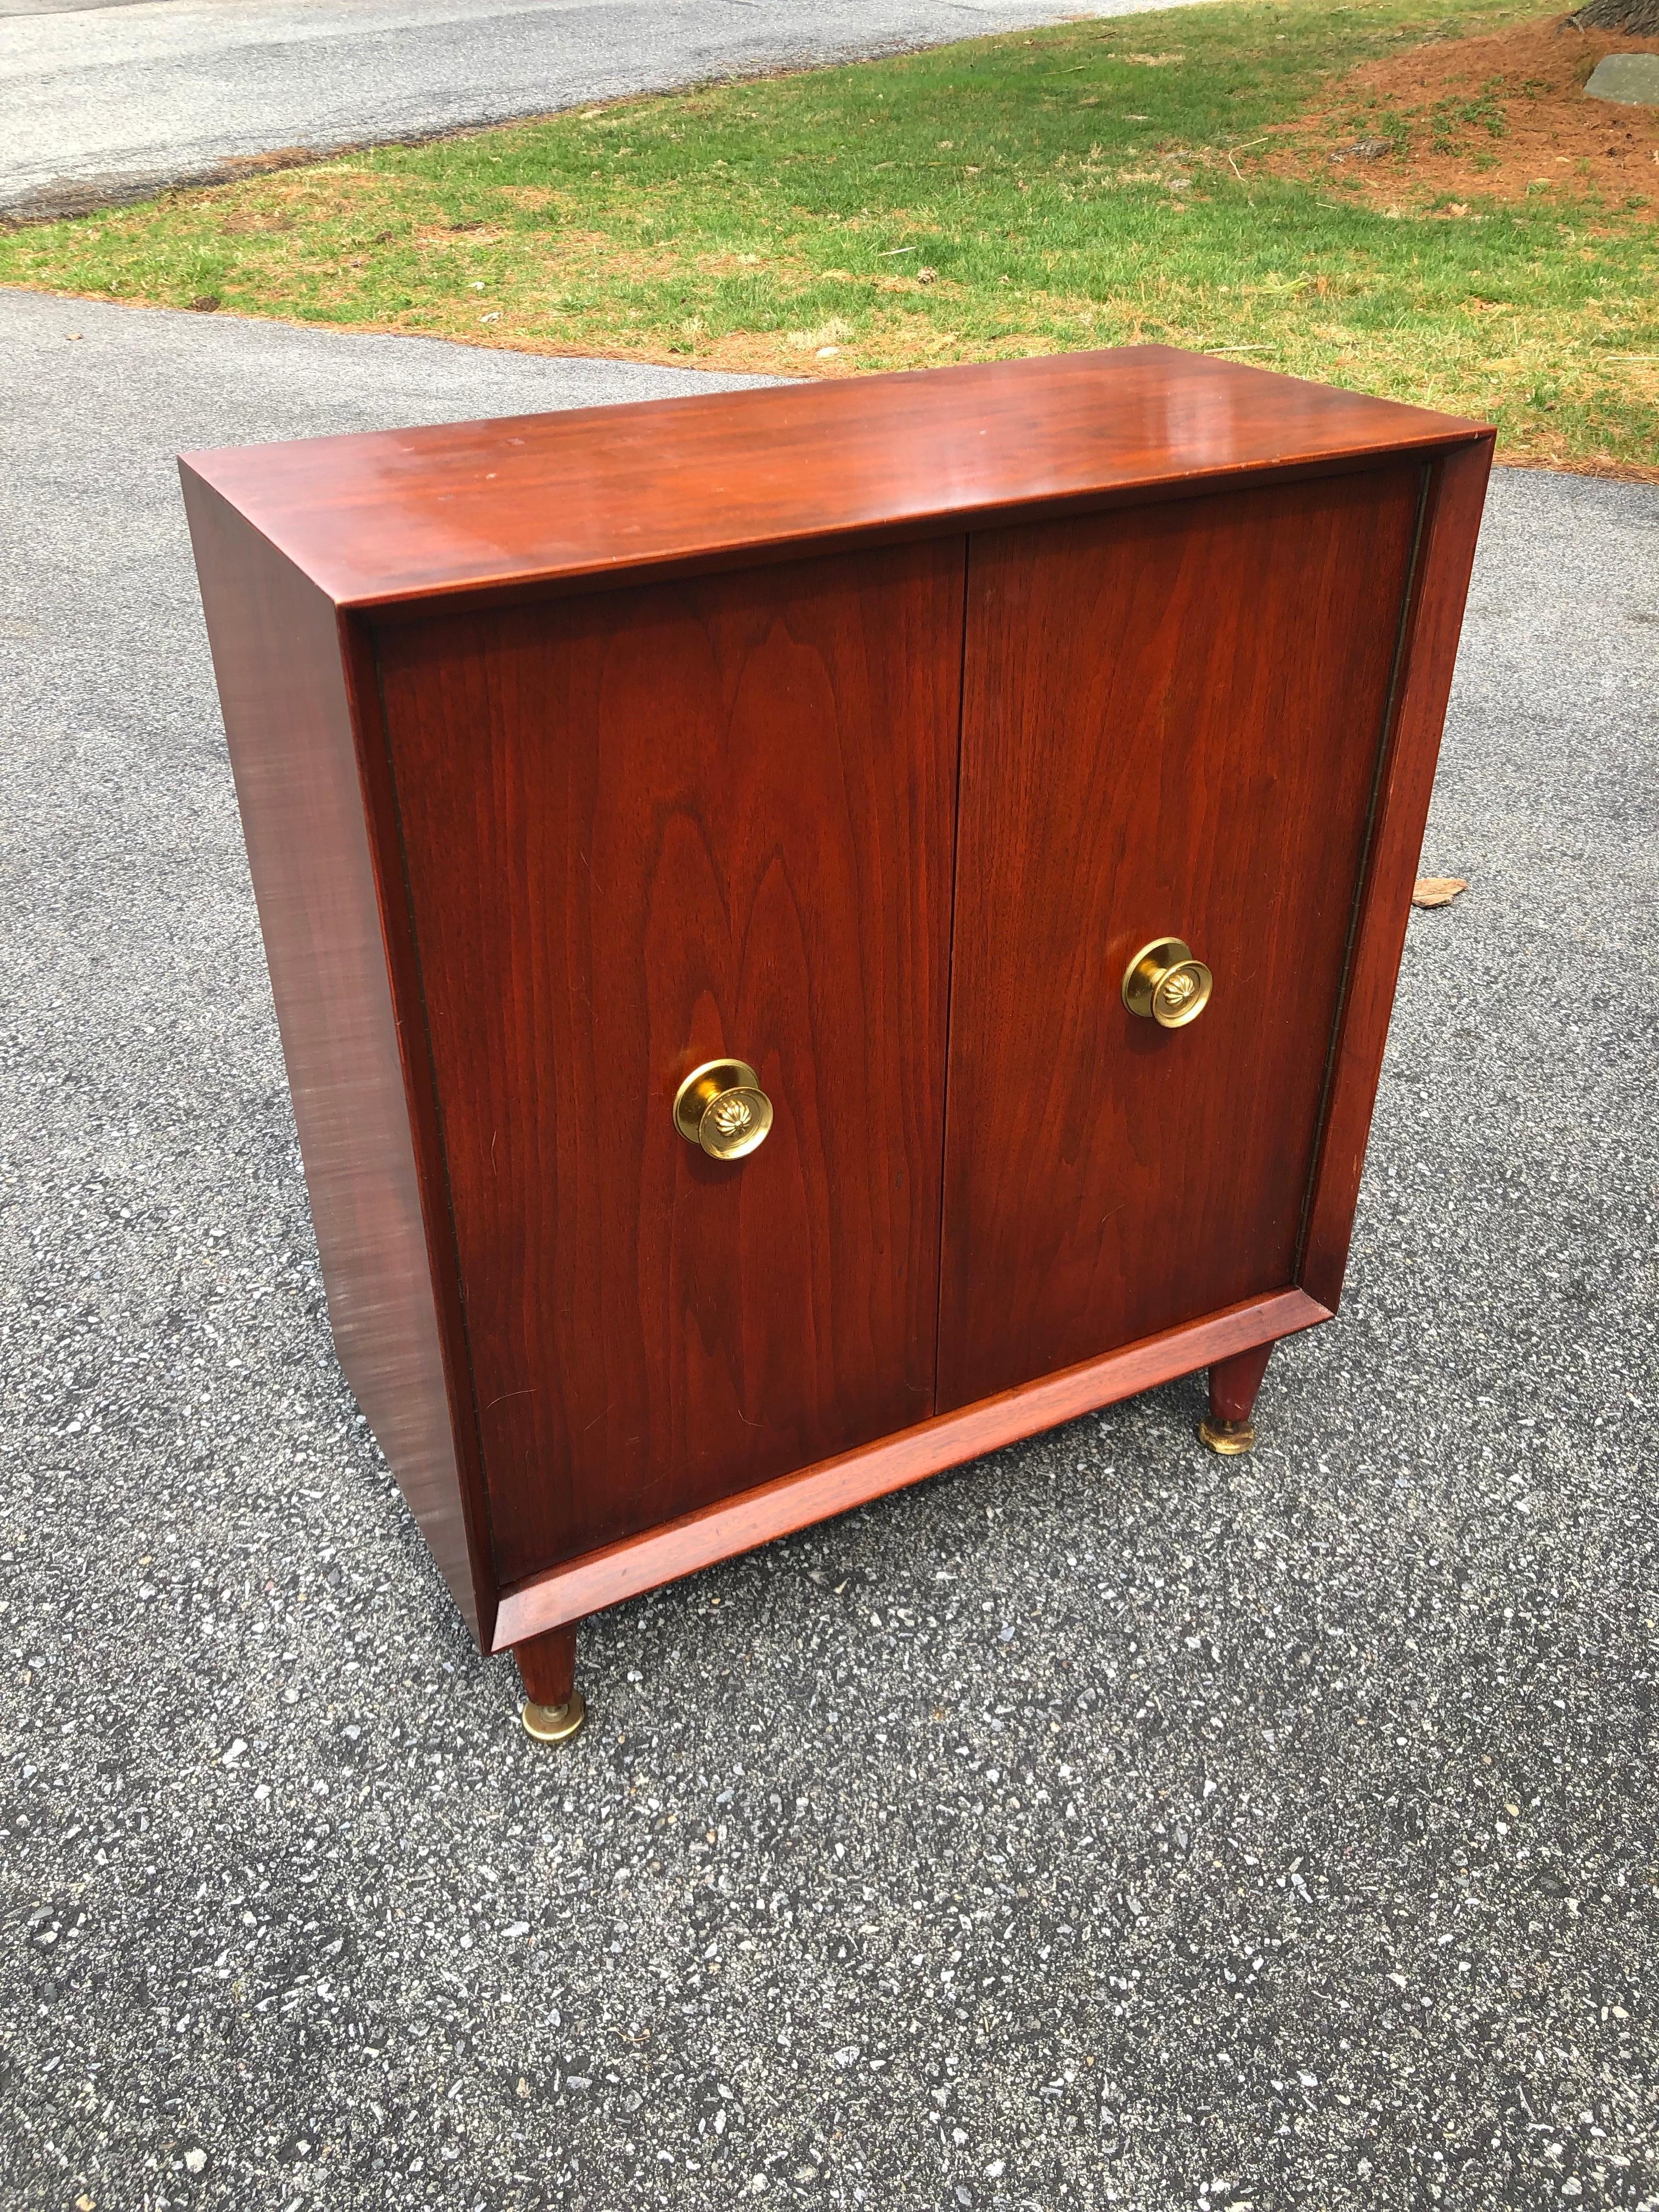 Midcentury Tommi Parzinger diminutive storage cabinet
Ribbon grain mahogany with wonderful color, two doors. Sculptural brass handles and feet.